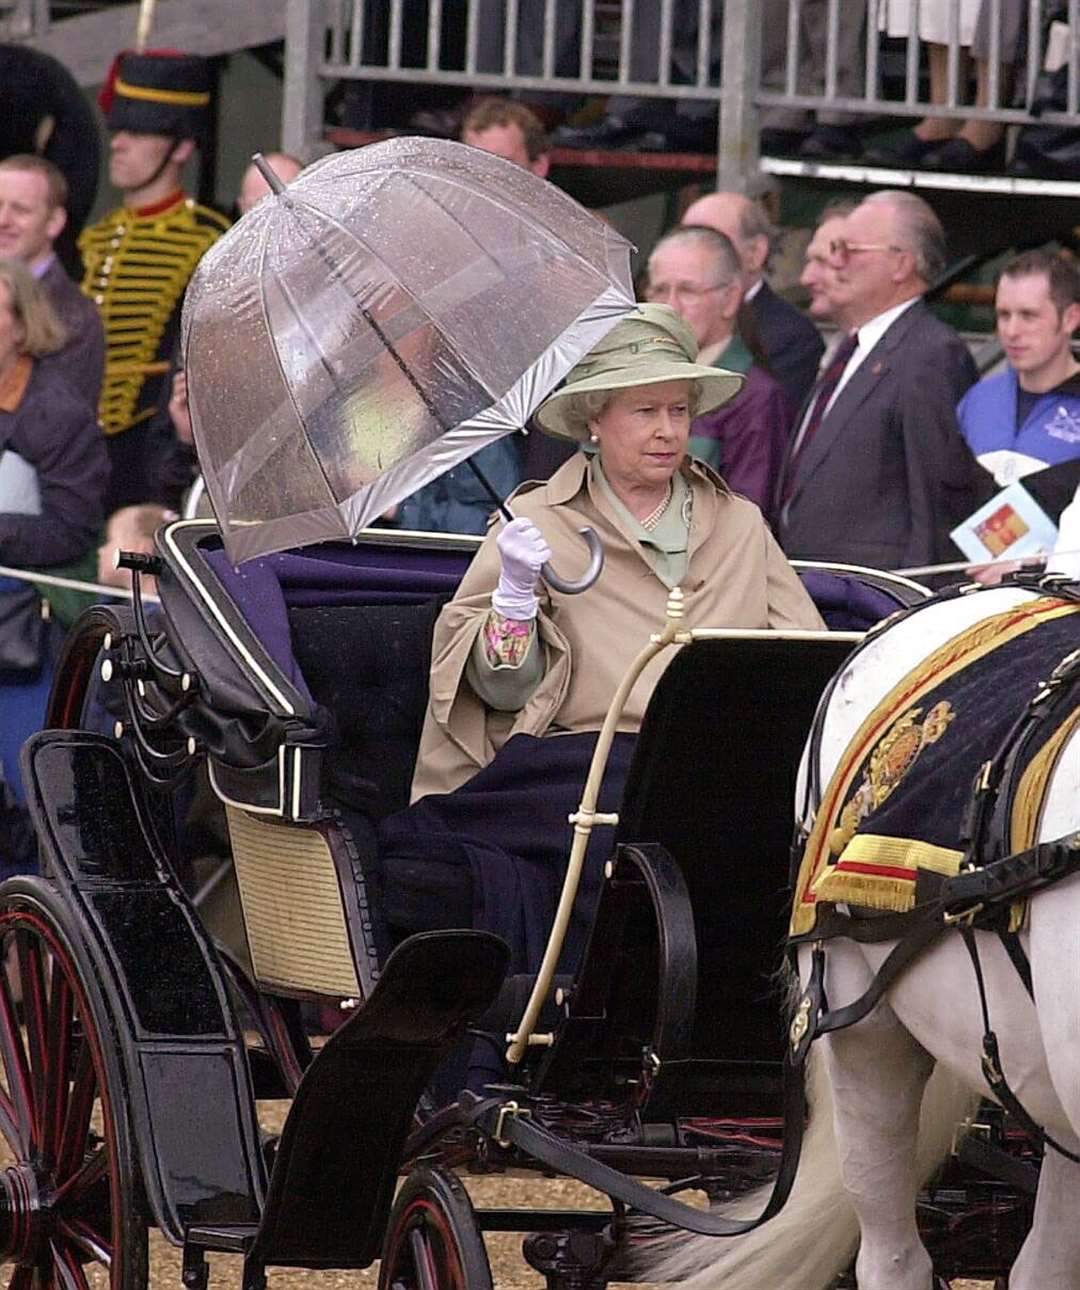 The Queen with an umbrella and a waterproof coat during a rainy carriage procession to Trooping in 2001 (Michael Stephens/PA)